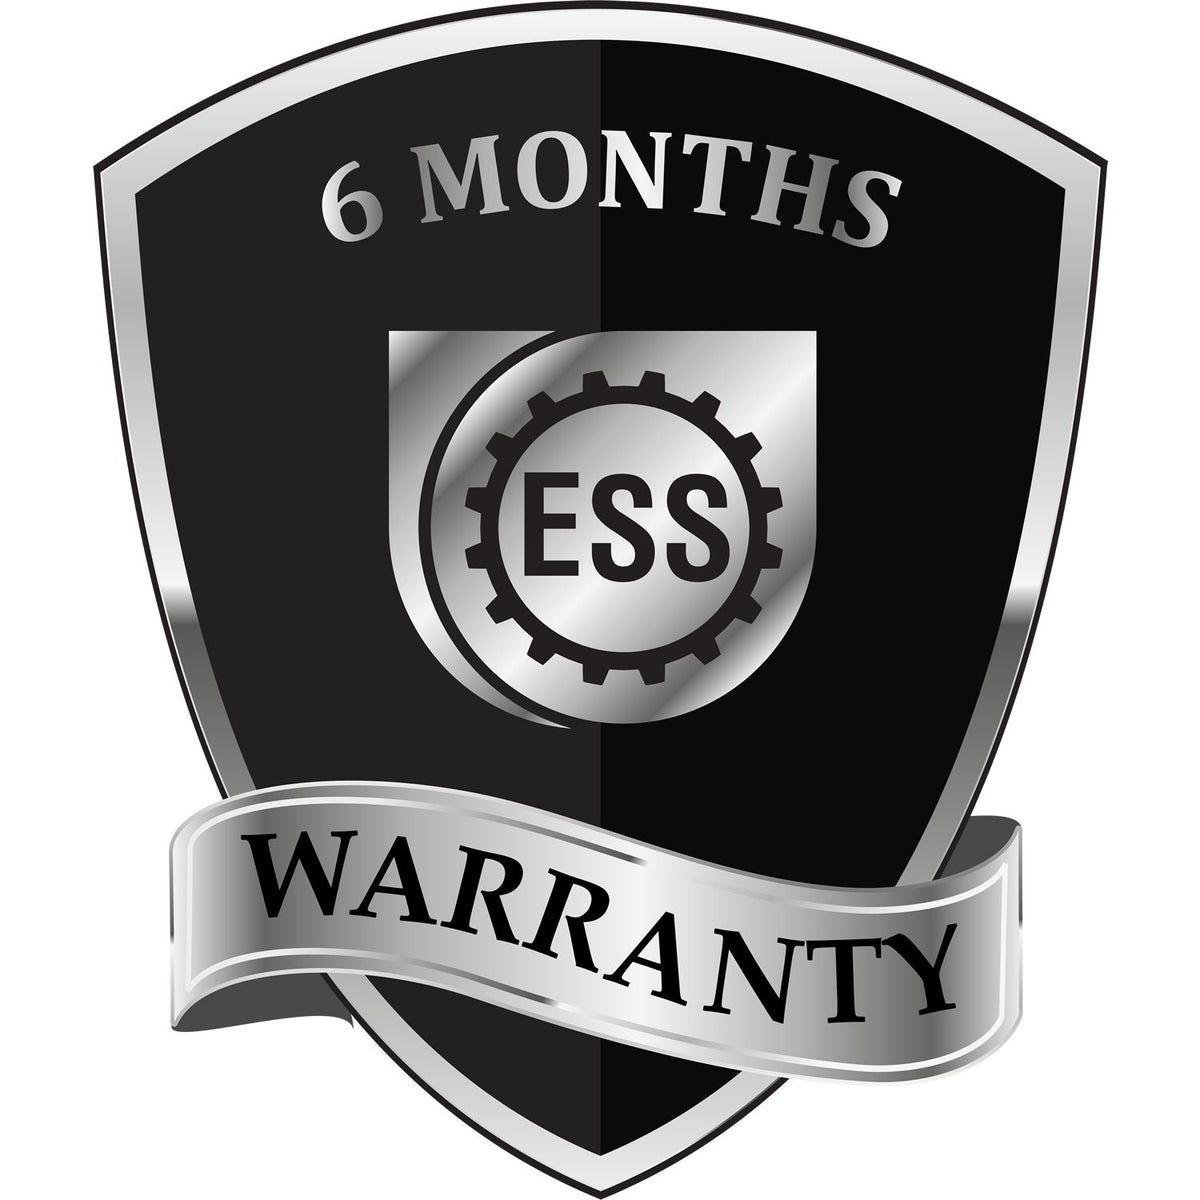 A badge or emblem showing a warranty icon for the Premium MaxLight Pre-Inked Missouri Engineering Stamp